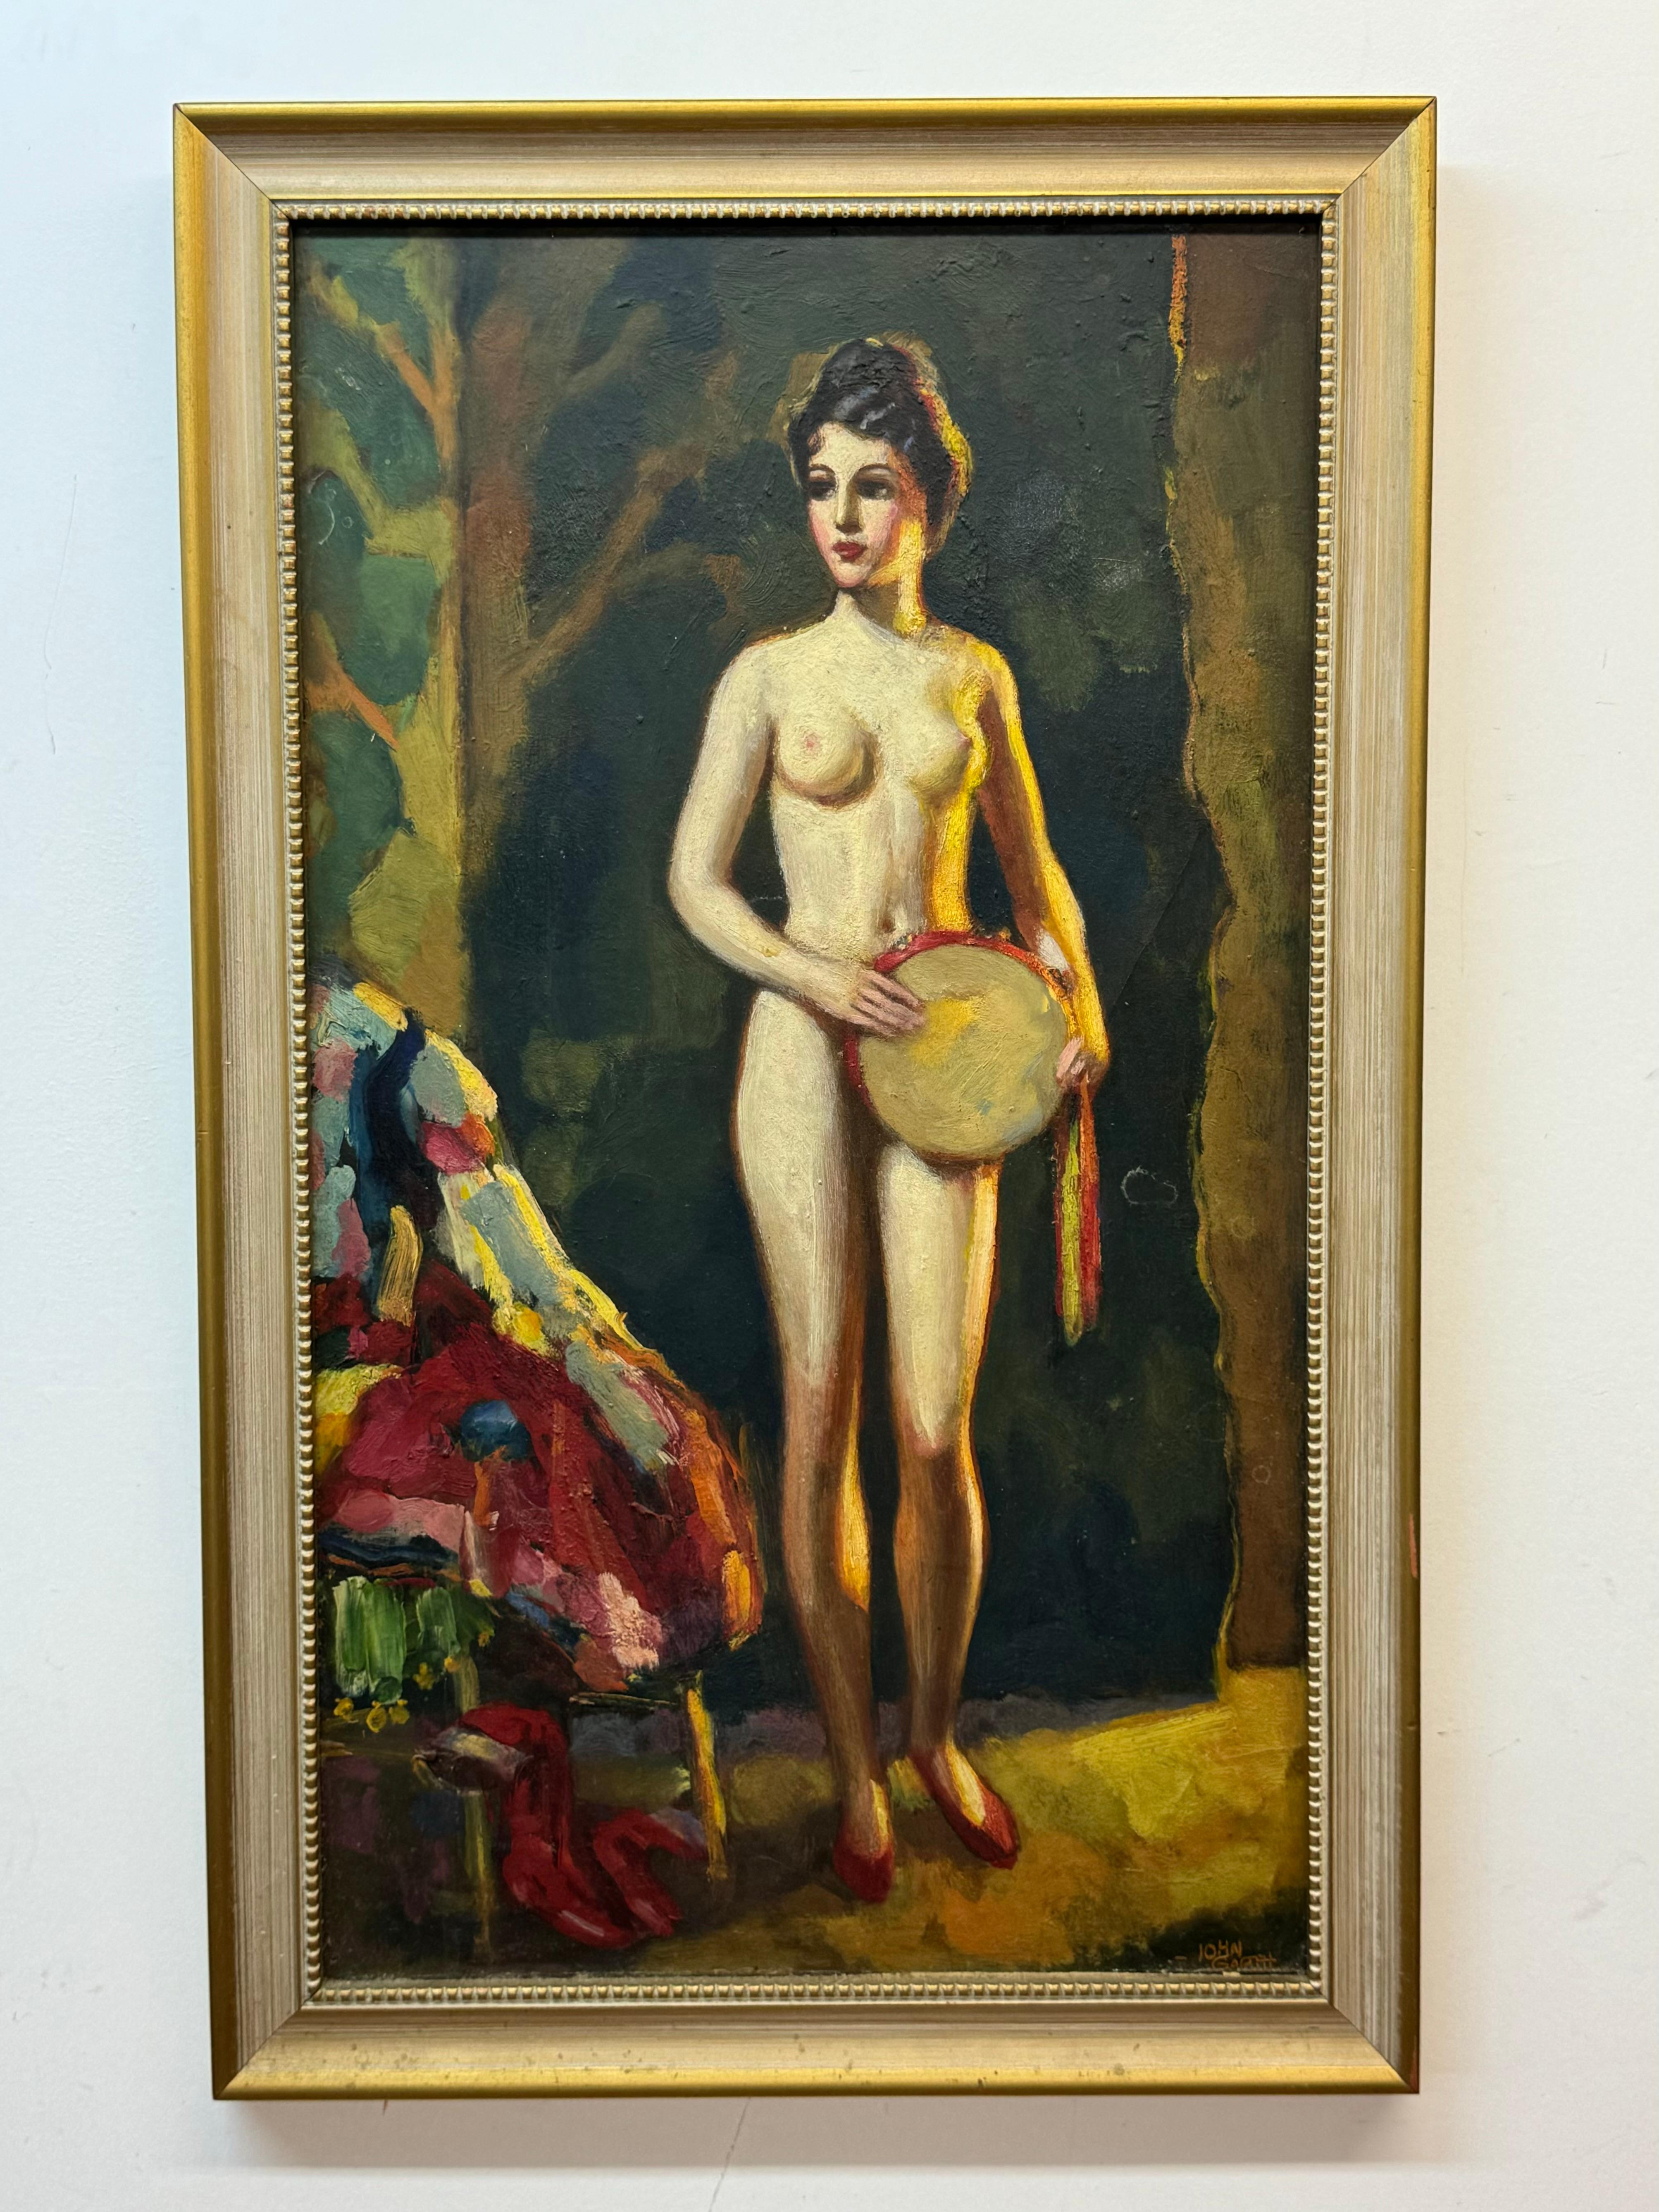 John Garth (1889-1971). female, nude, painting by prolific California artist widely recognized for his astonishing murals. Oil on canvas board. 14 x 24.5 unframed, 16.5 x 27 framed.